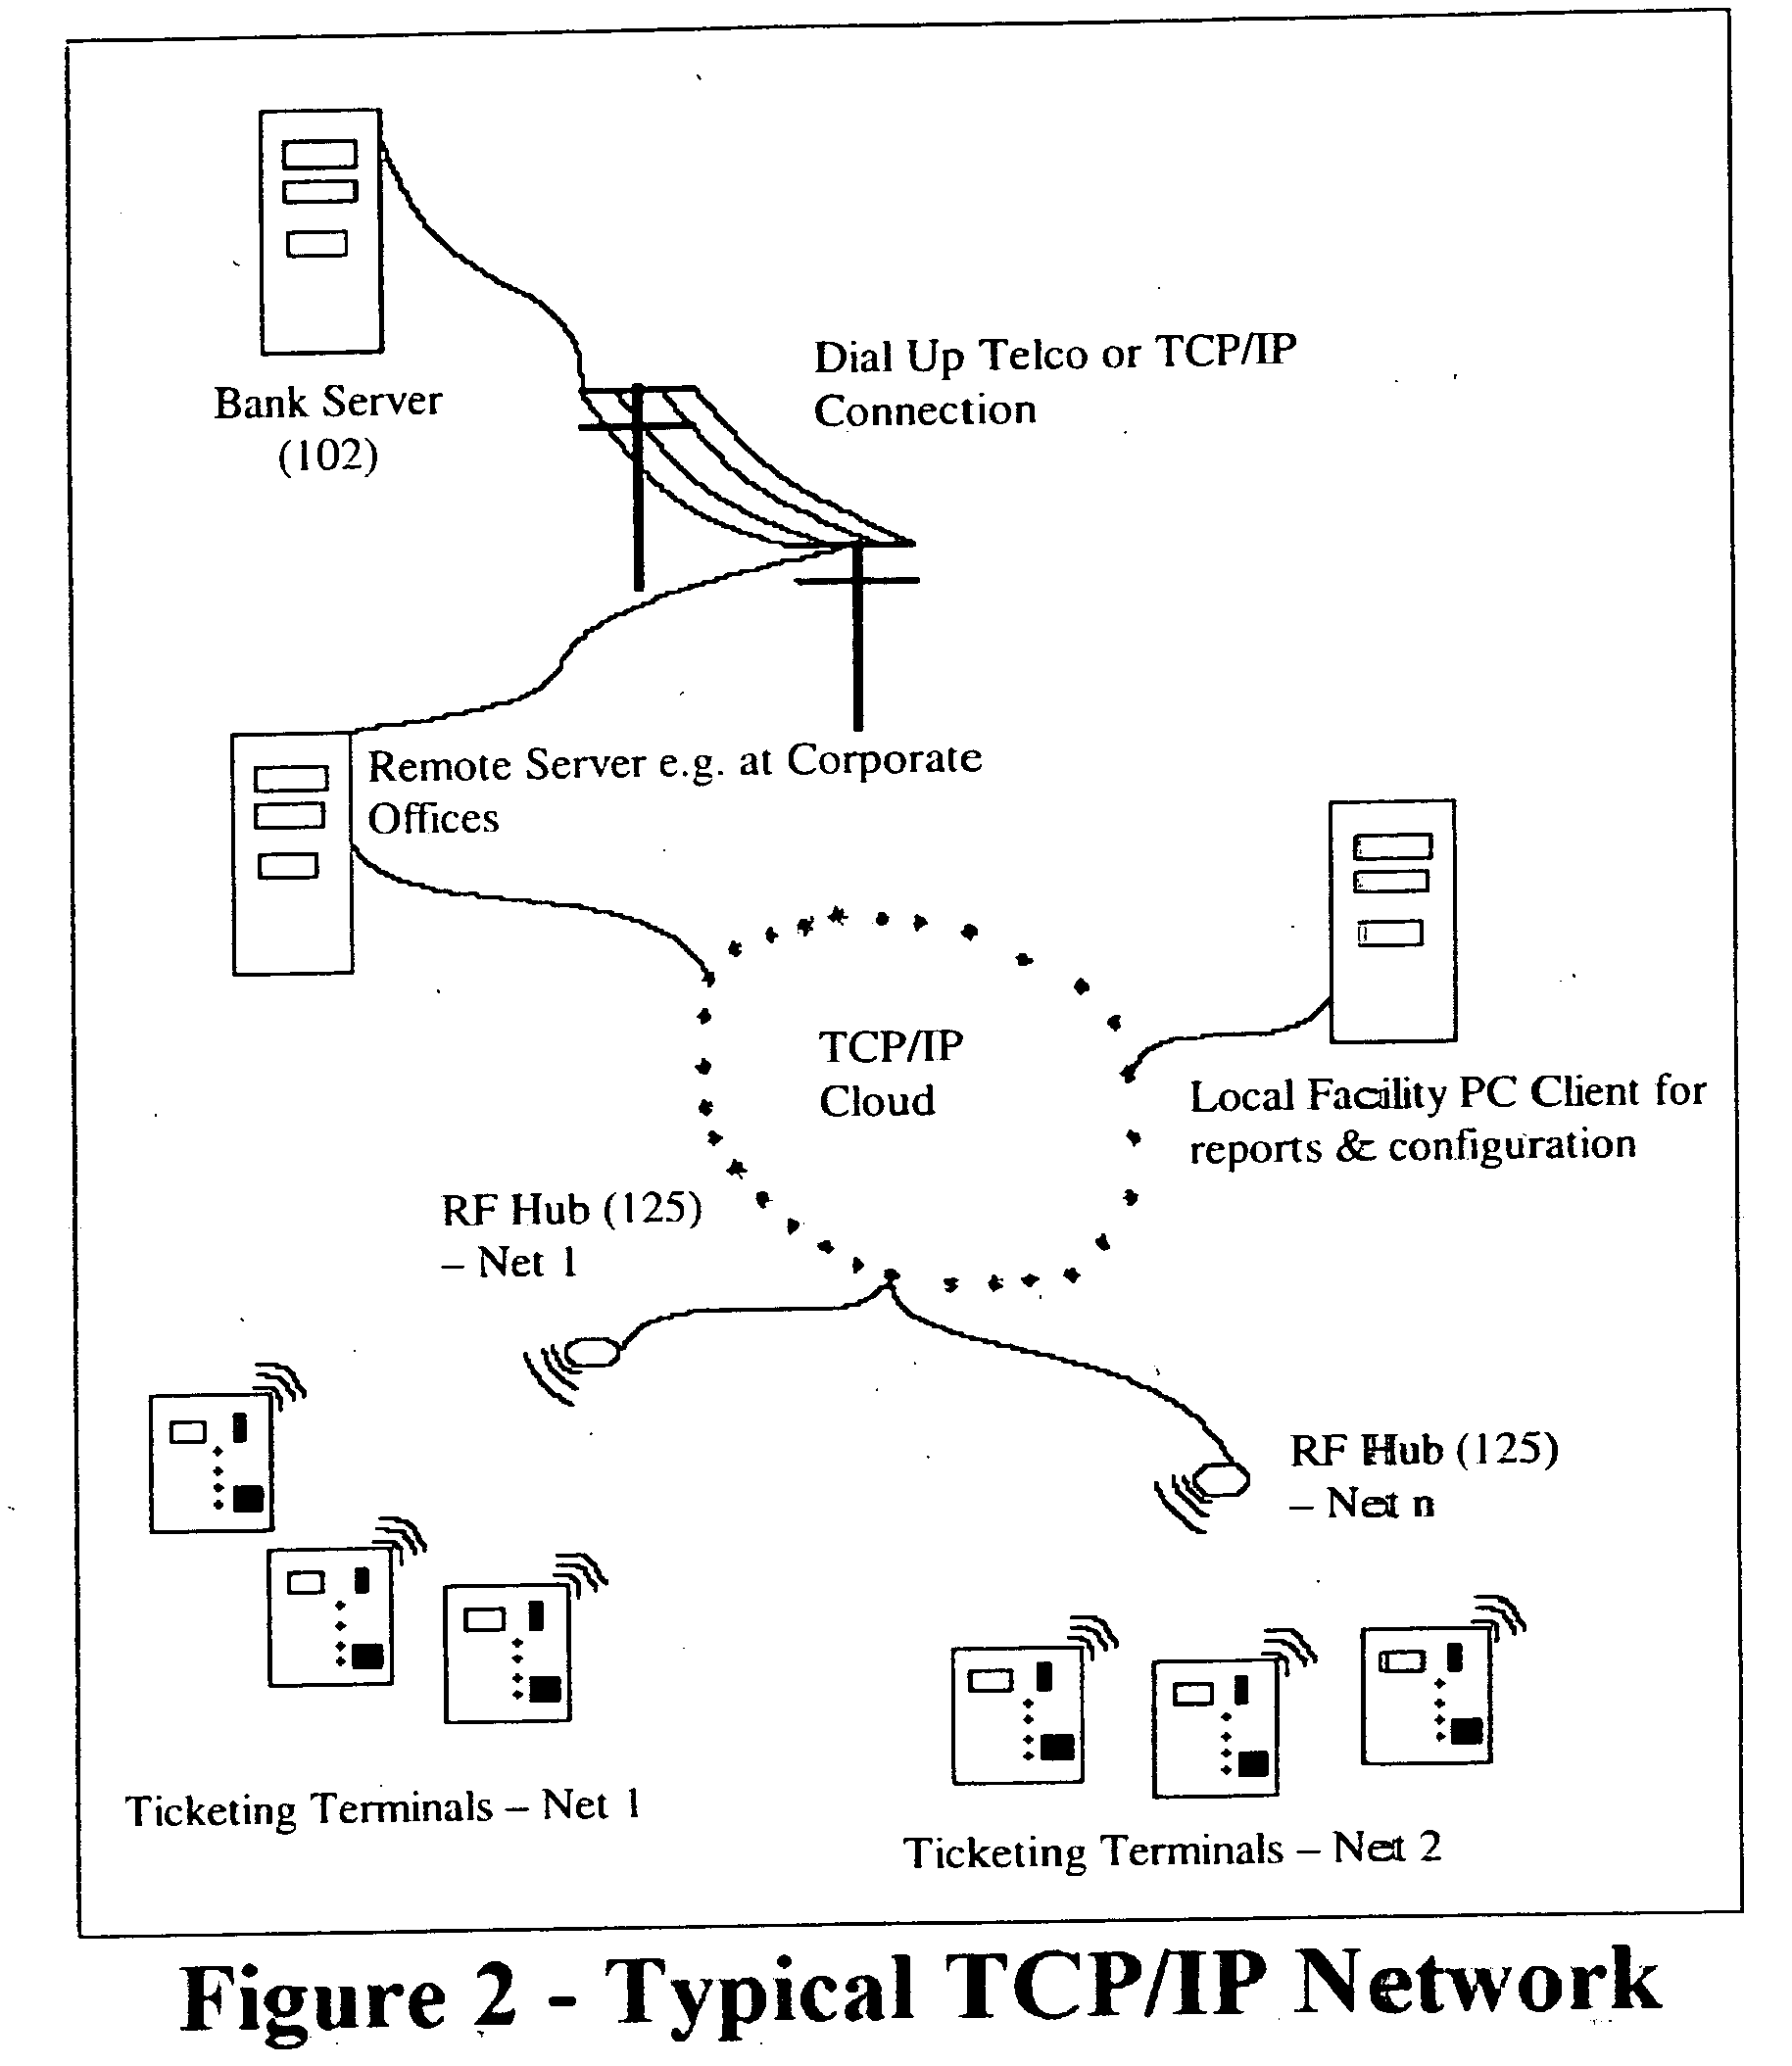 Portable networked self-service terminals for product/service selection